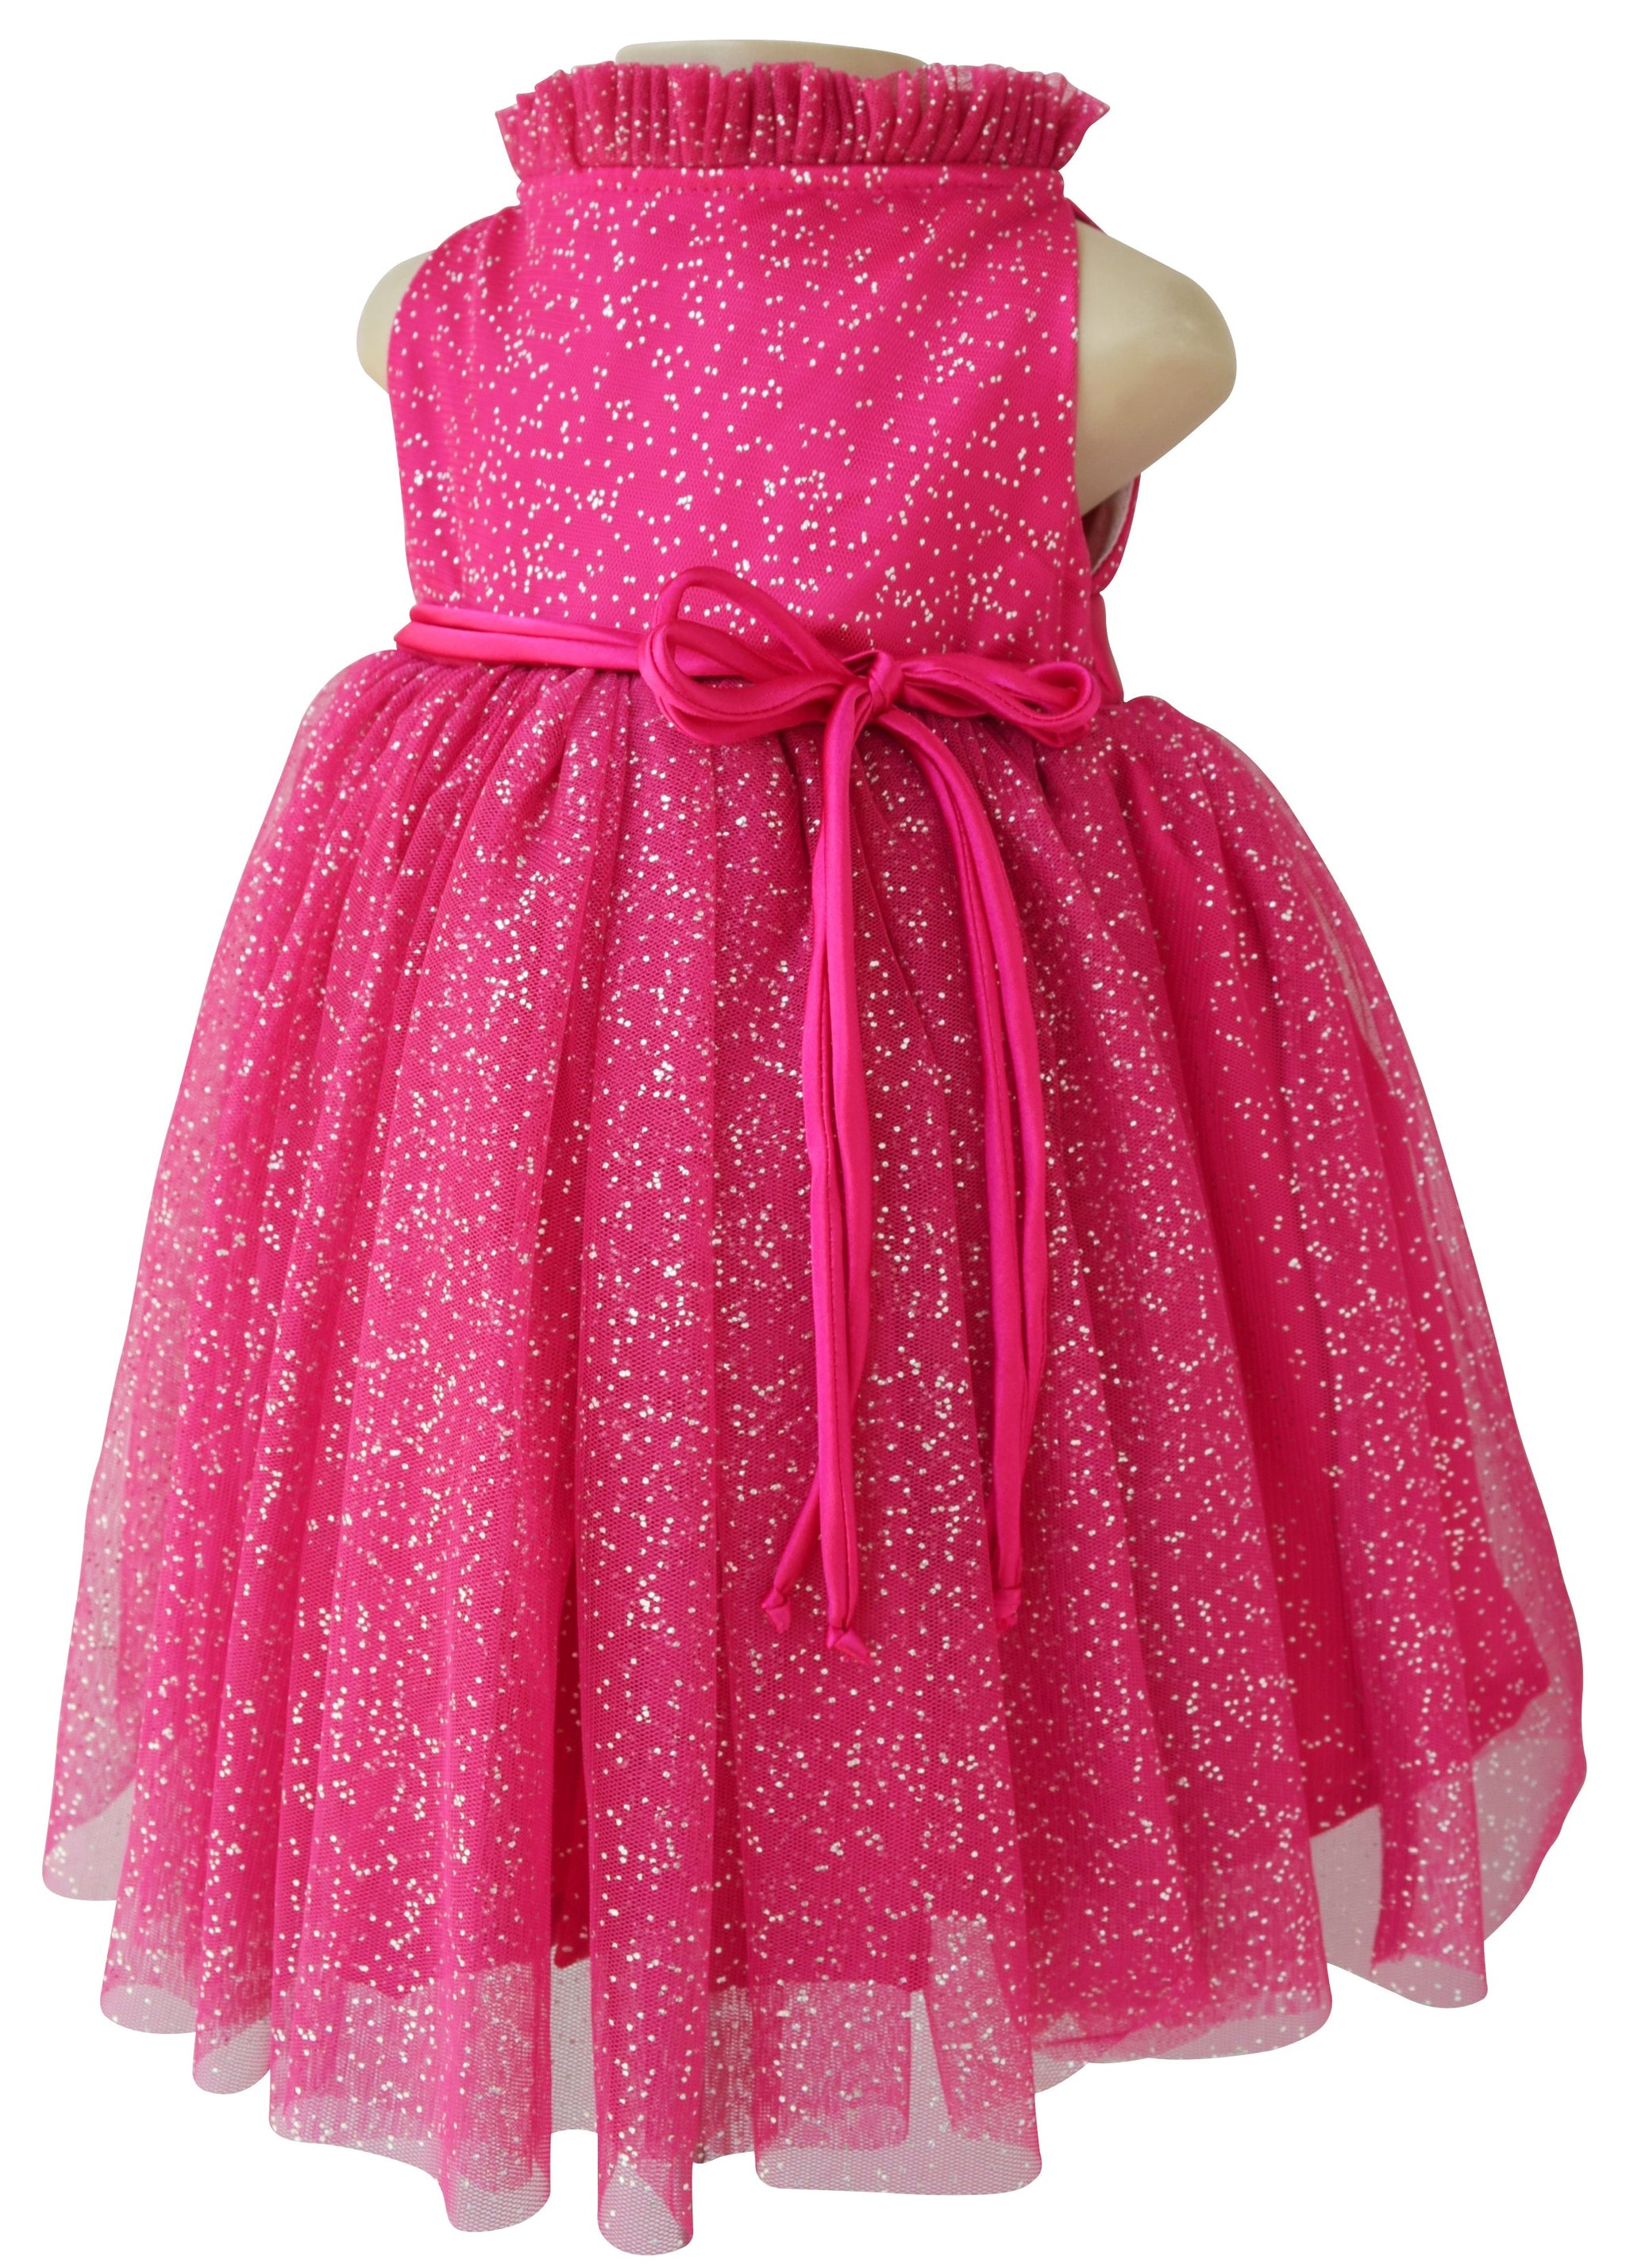 party dresses for 12 year olds uk